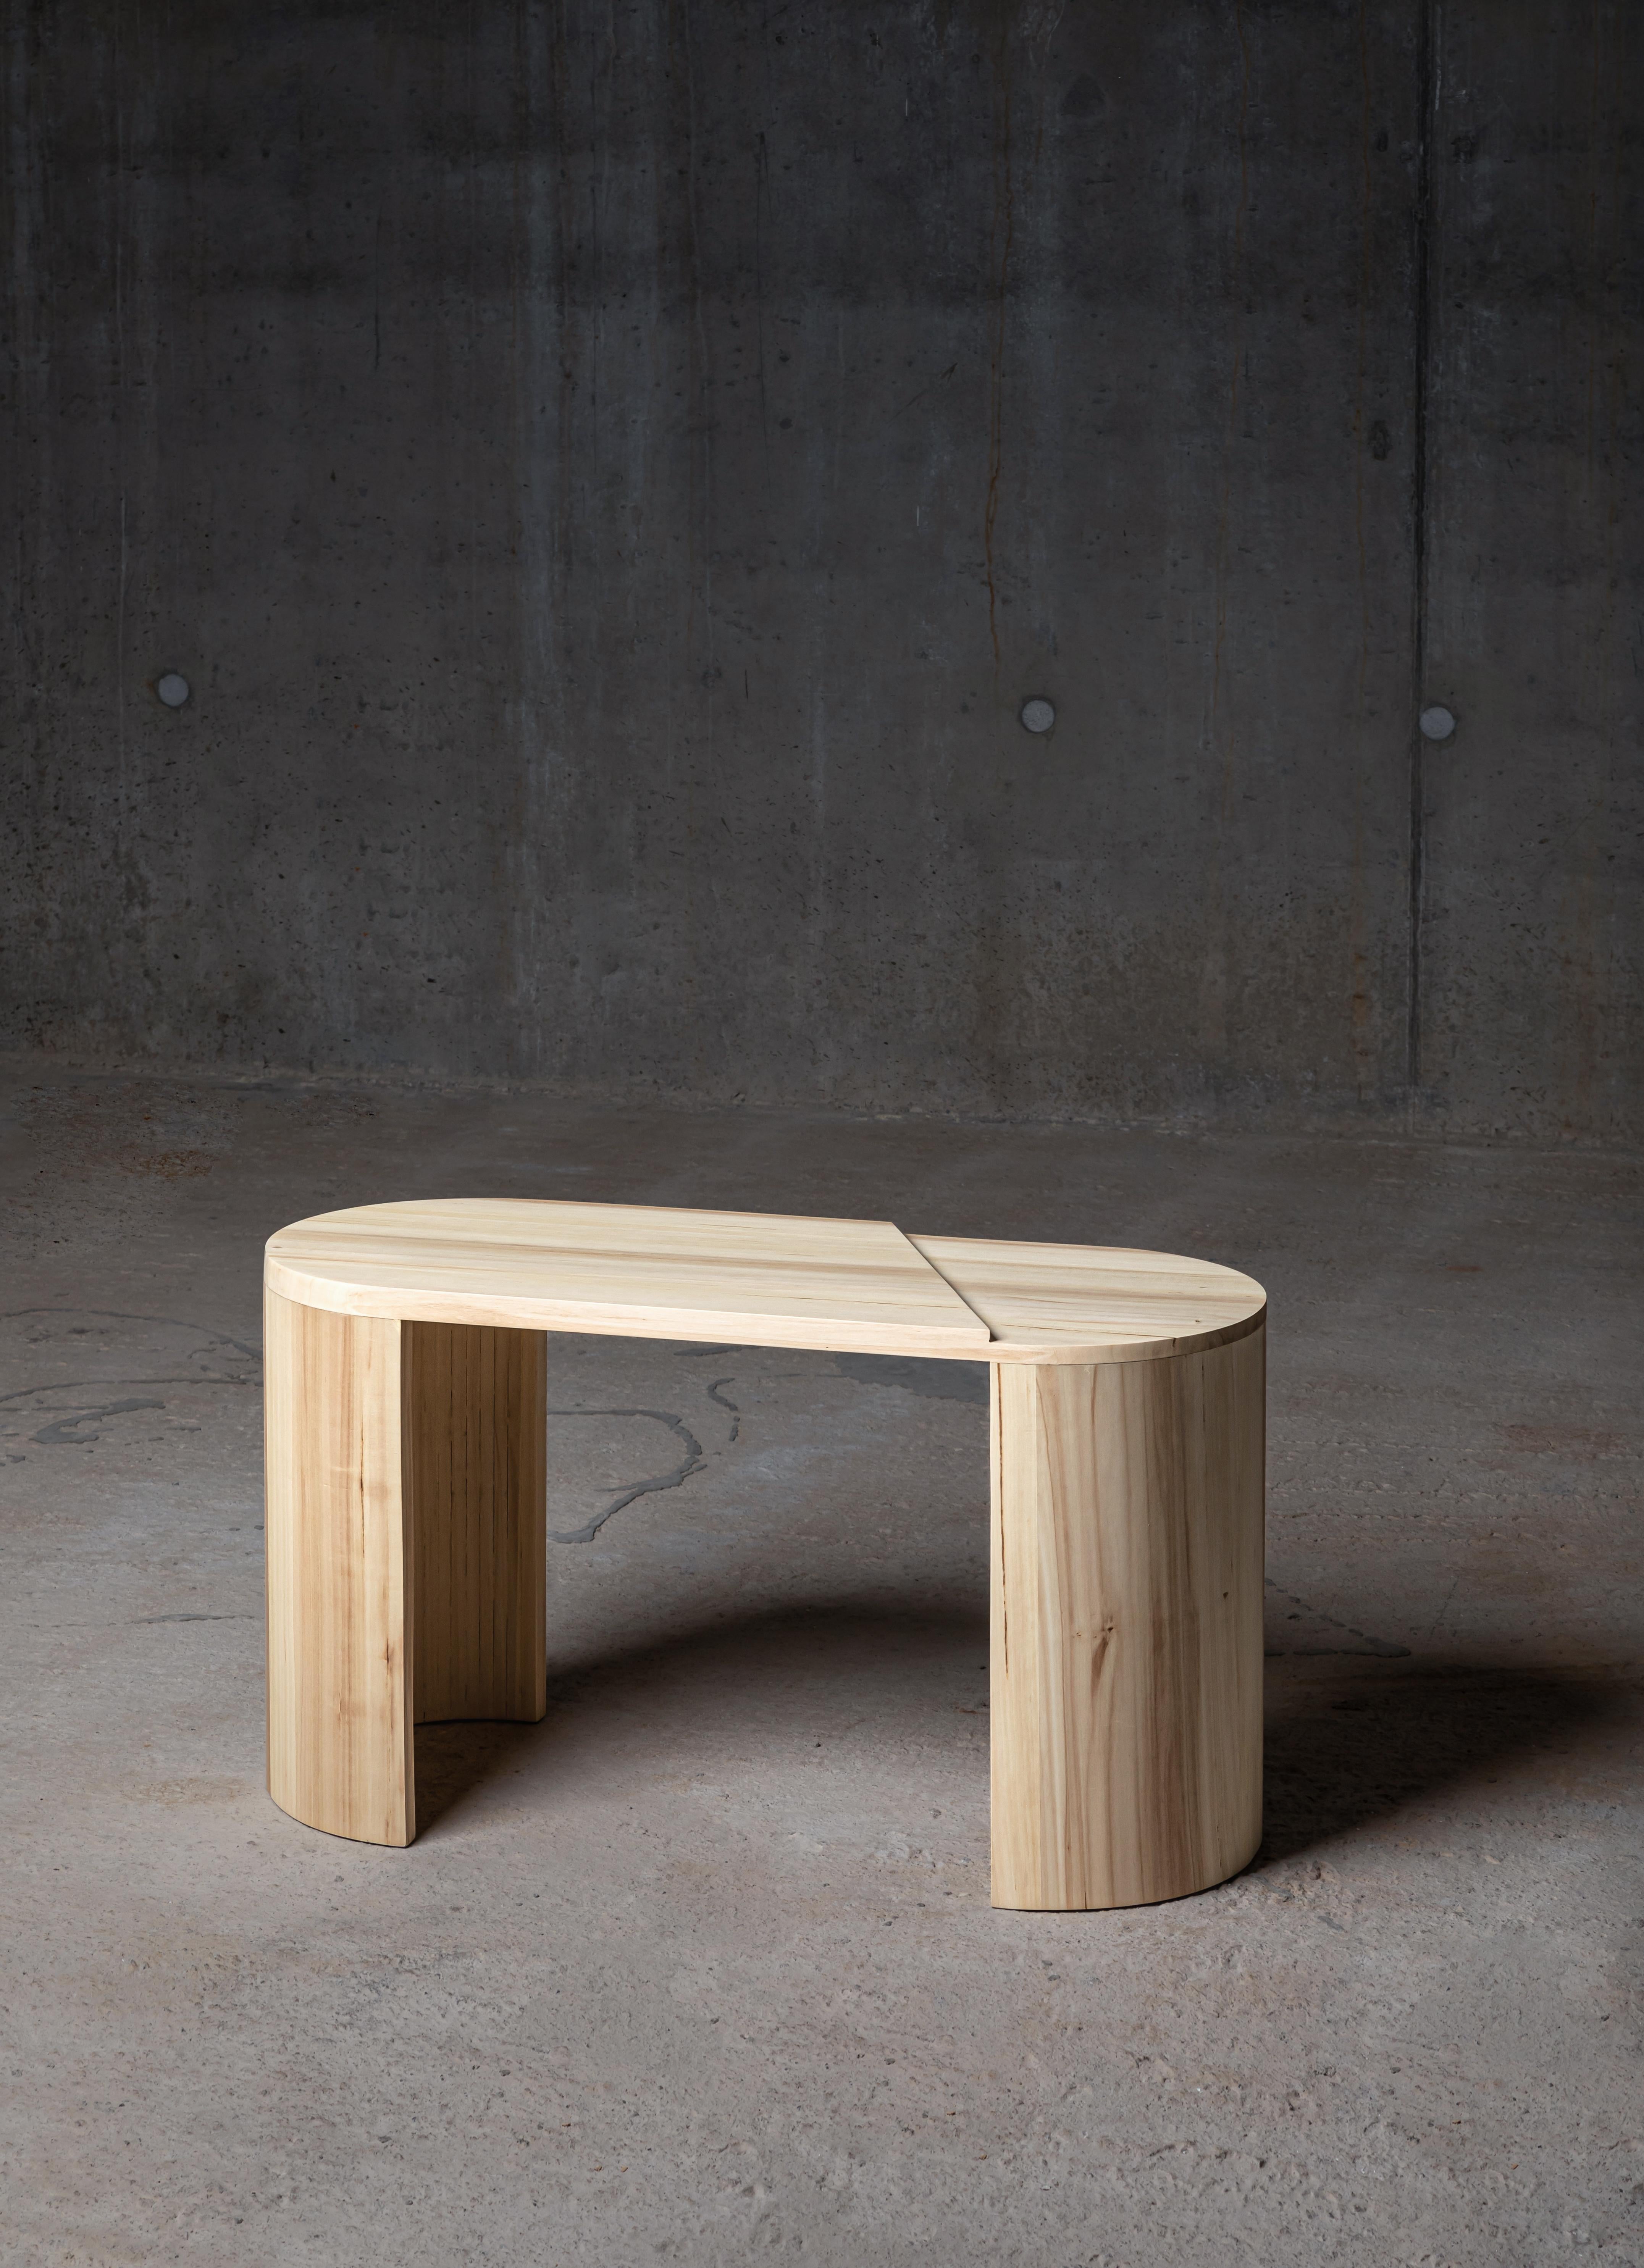 A generous sized coffee table made from tulip wood, and the makers marks are visible in the kerf bend on the legs. The soft shape is a nod to the materials former life, but the graphic line cutting through it - creating a step in the top - reminds